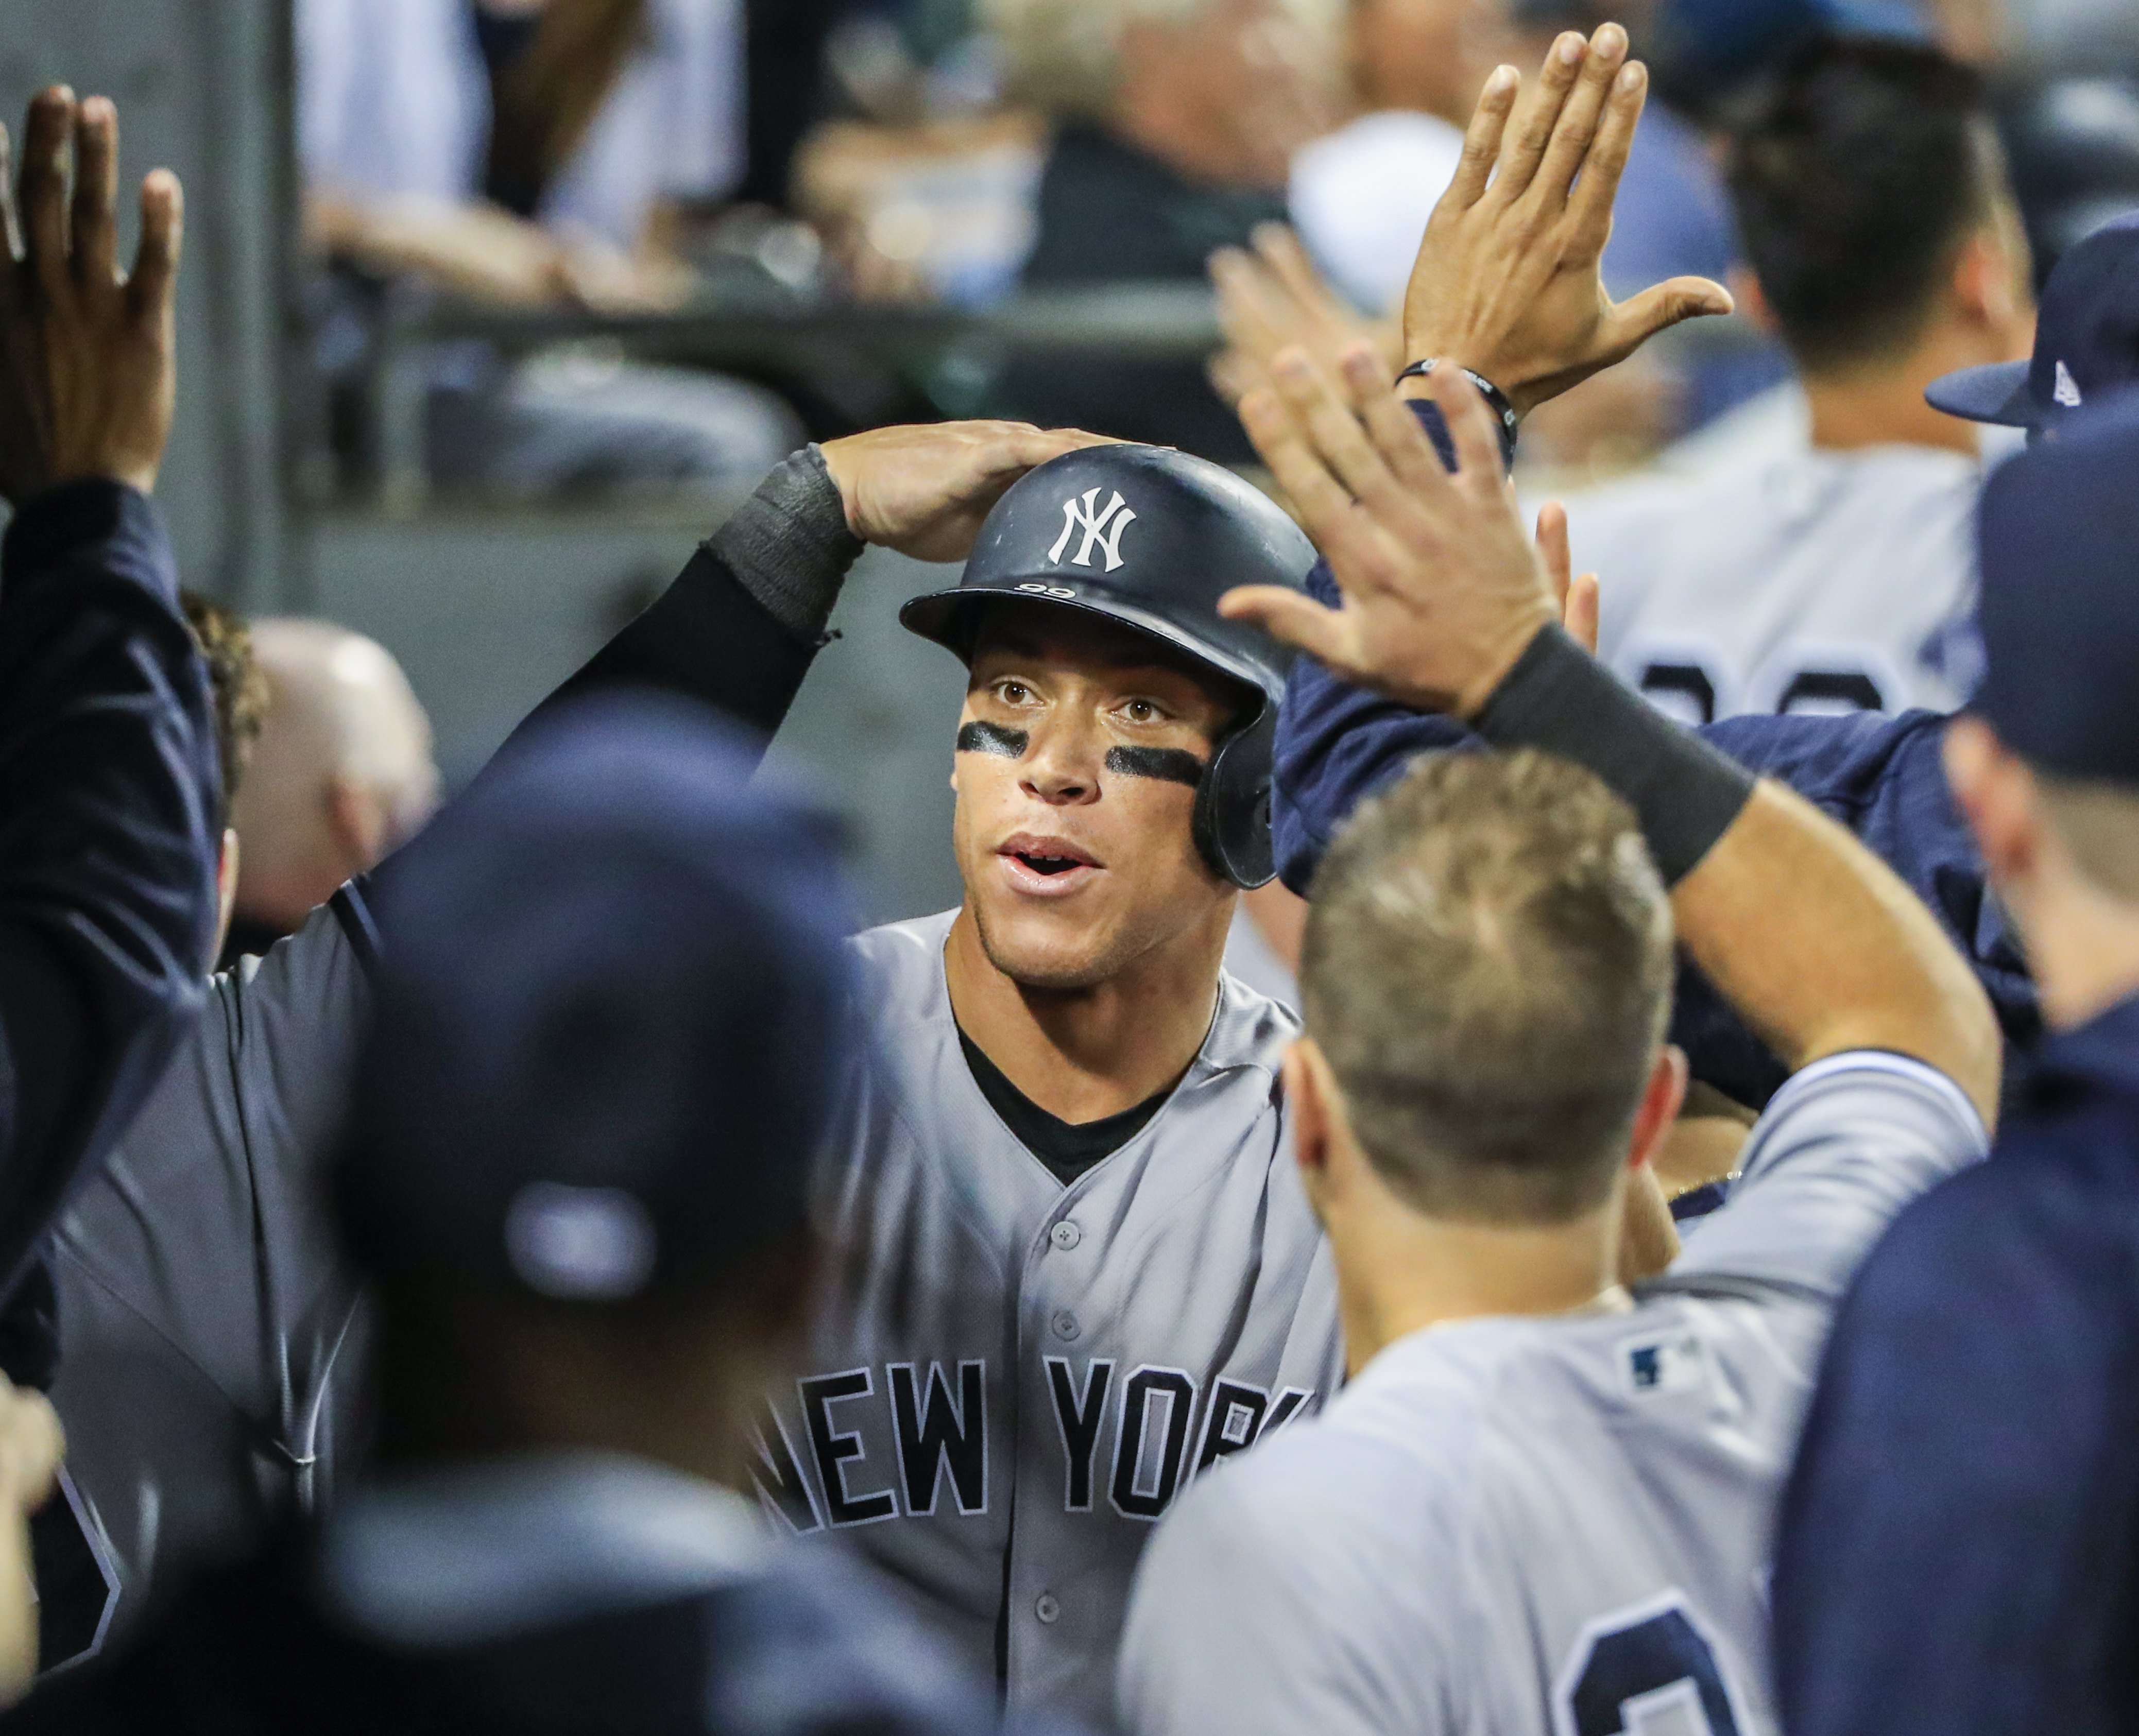 2017-06-27 21:30:53 epa06053456 New York Yankees outfielder Aaron Judge (C) celebrates with teammates after he and New York Yankees outfielder Jacoby Ellsbury scored on a double hit by New York Yankees designated hitter Gary Sanchez against the Chicago White Sox in the eightn inning of their MLB game at Guaranteed Rate Field in Chicago, Illinois, USA, 27 June 2017. EPA/TANNEN MAURY